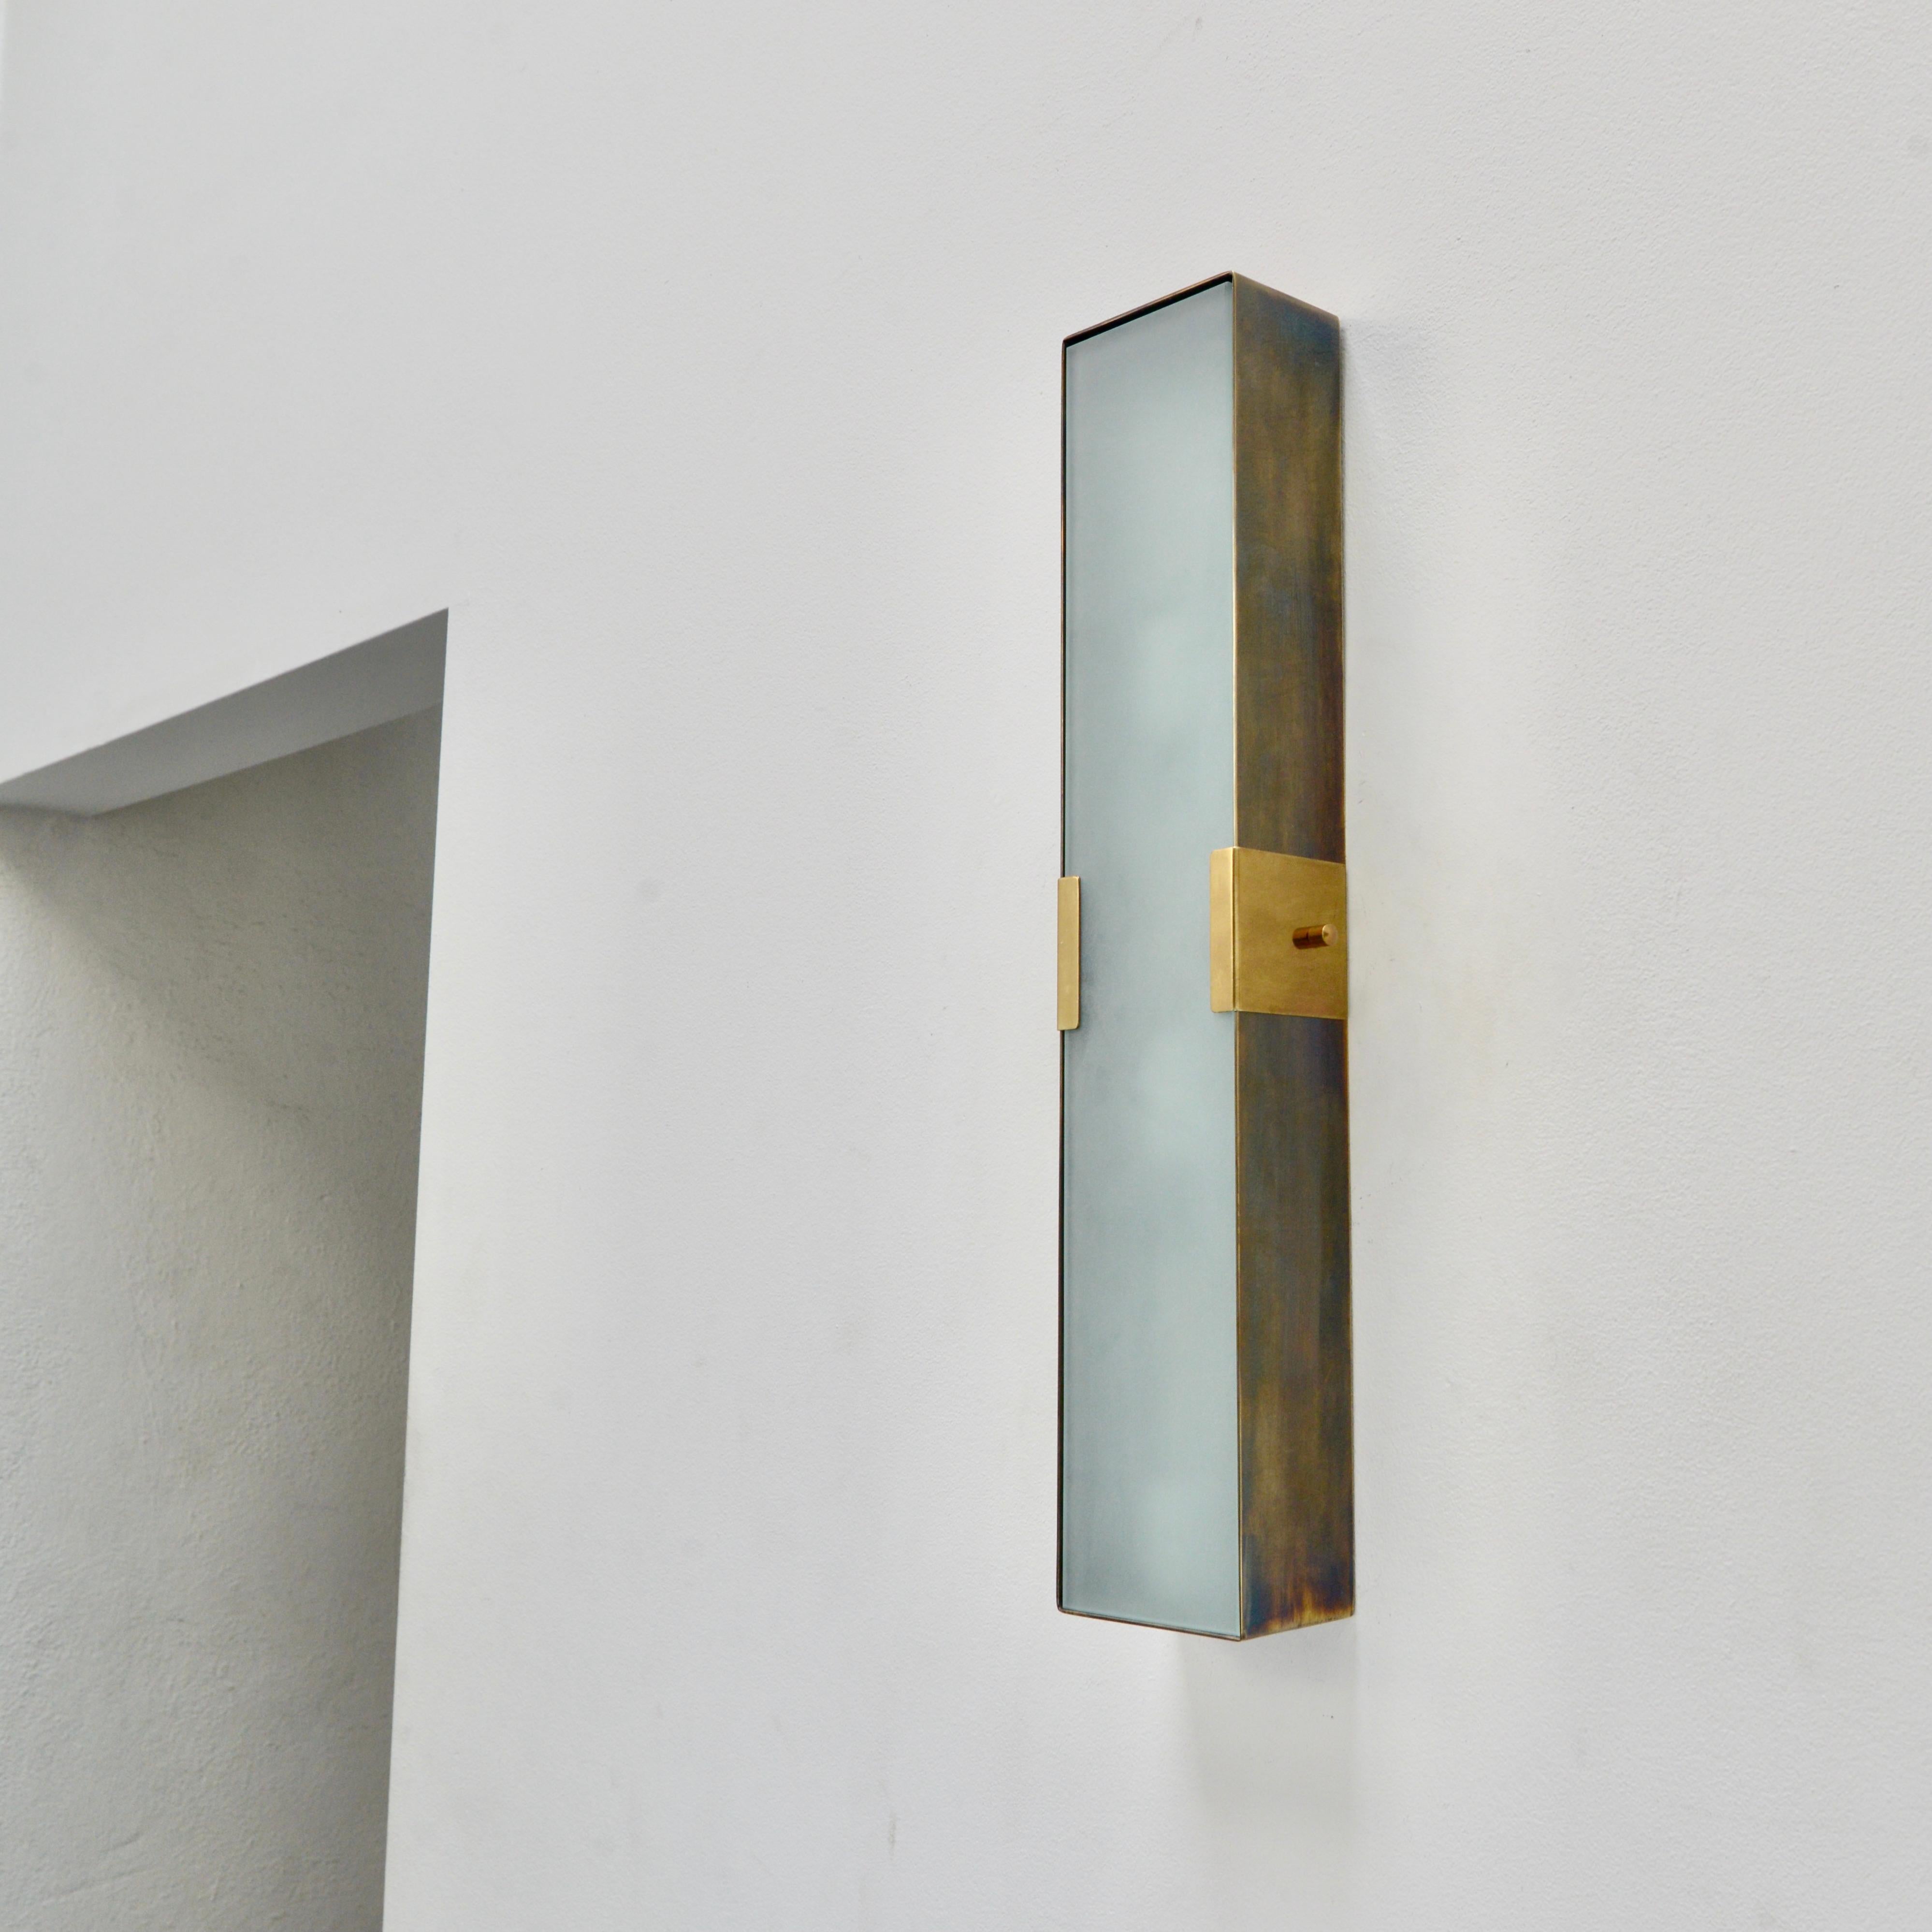 LUsquare RT Sconce (pb, as) In New Condition For Sale In Los Angeles, CA